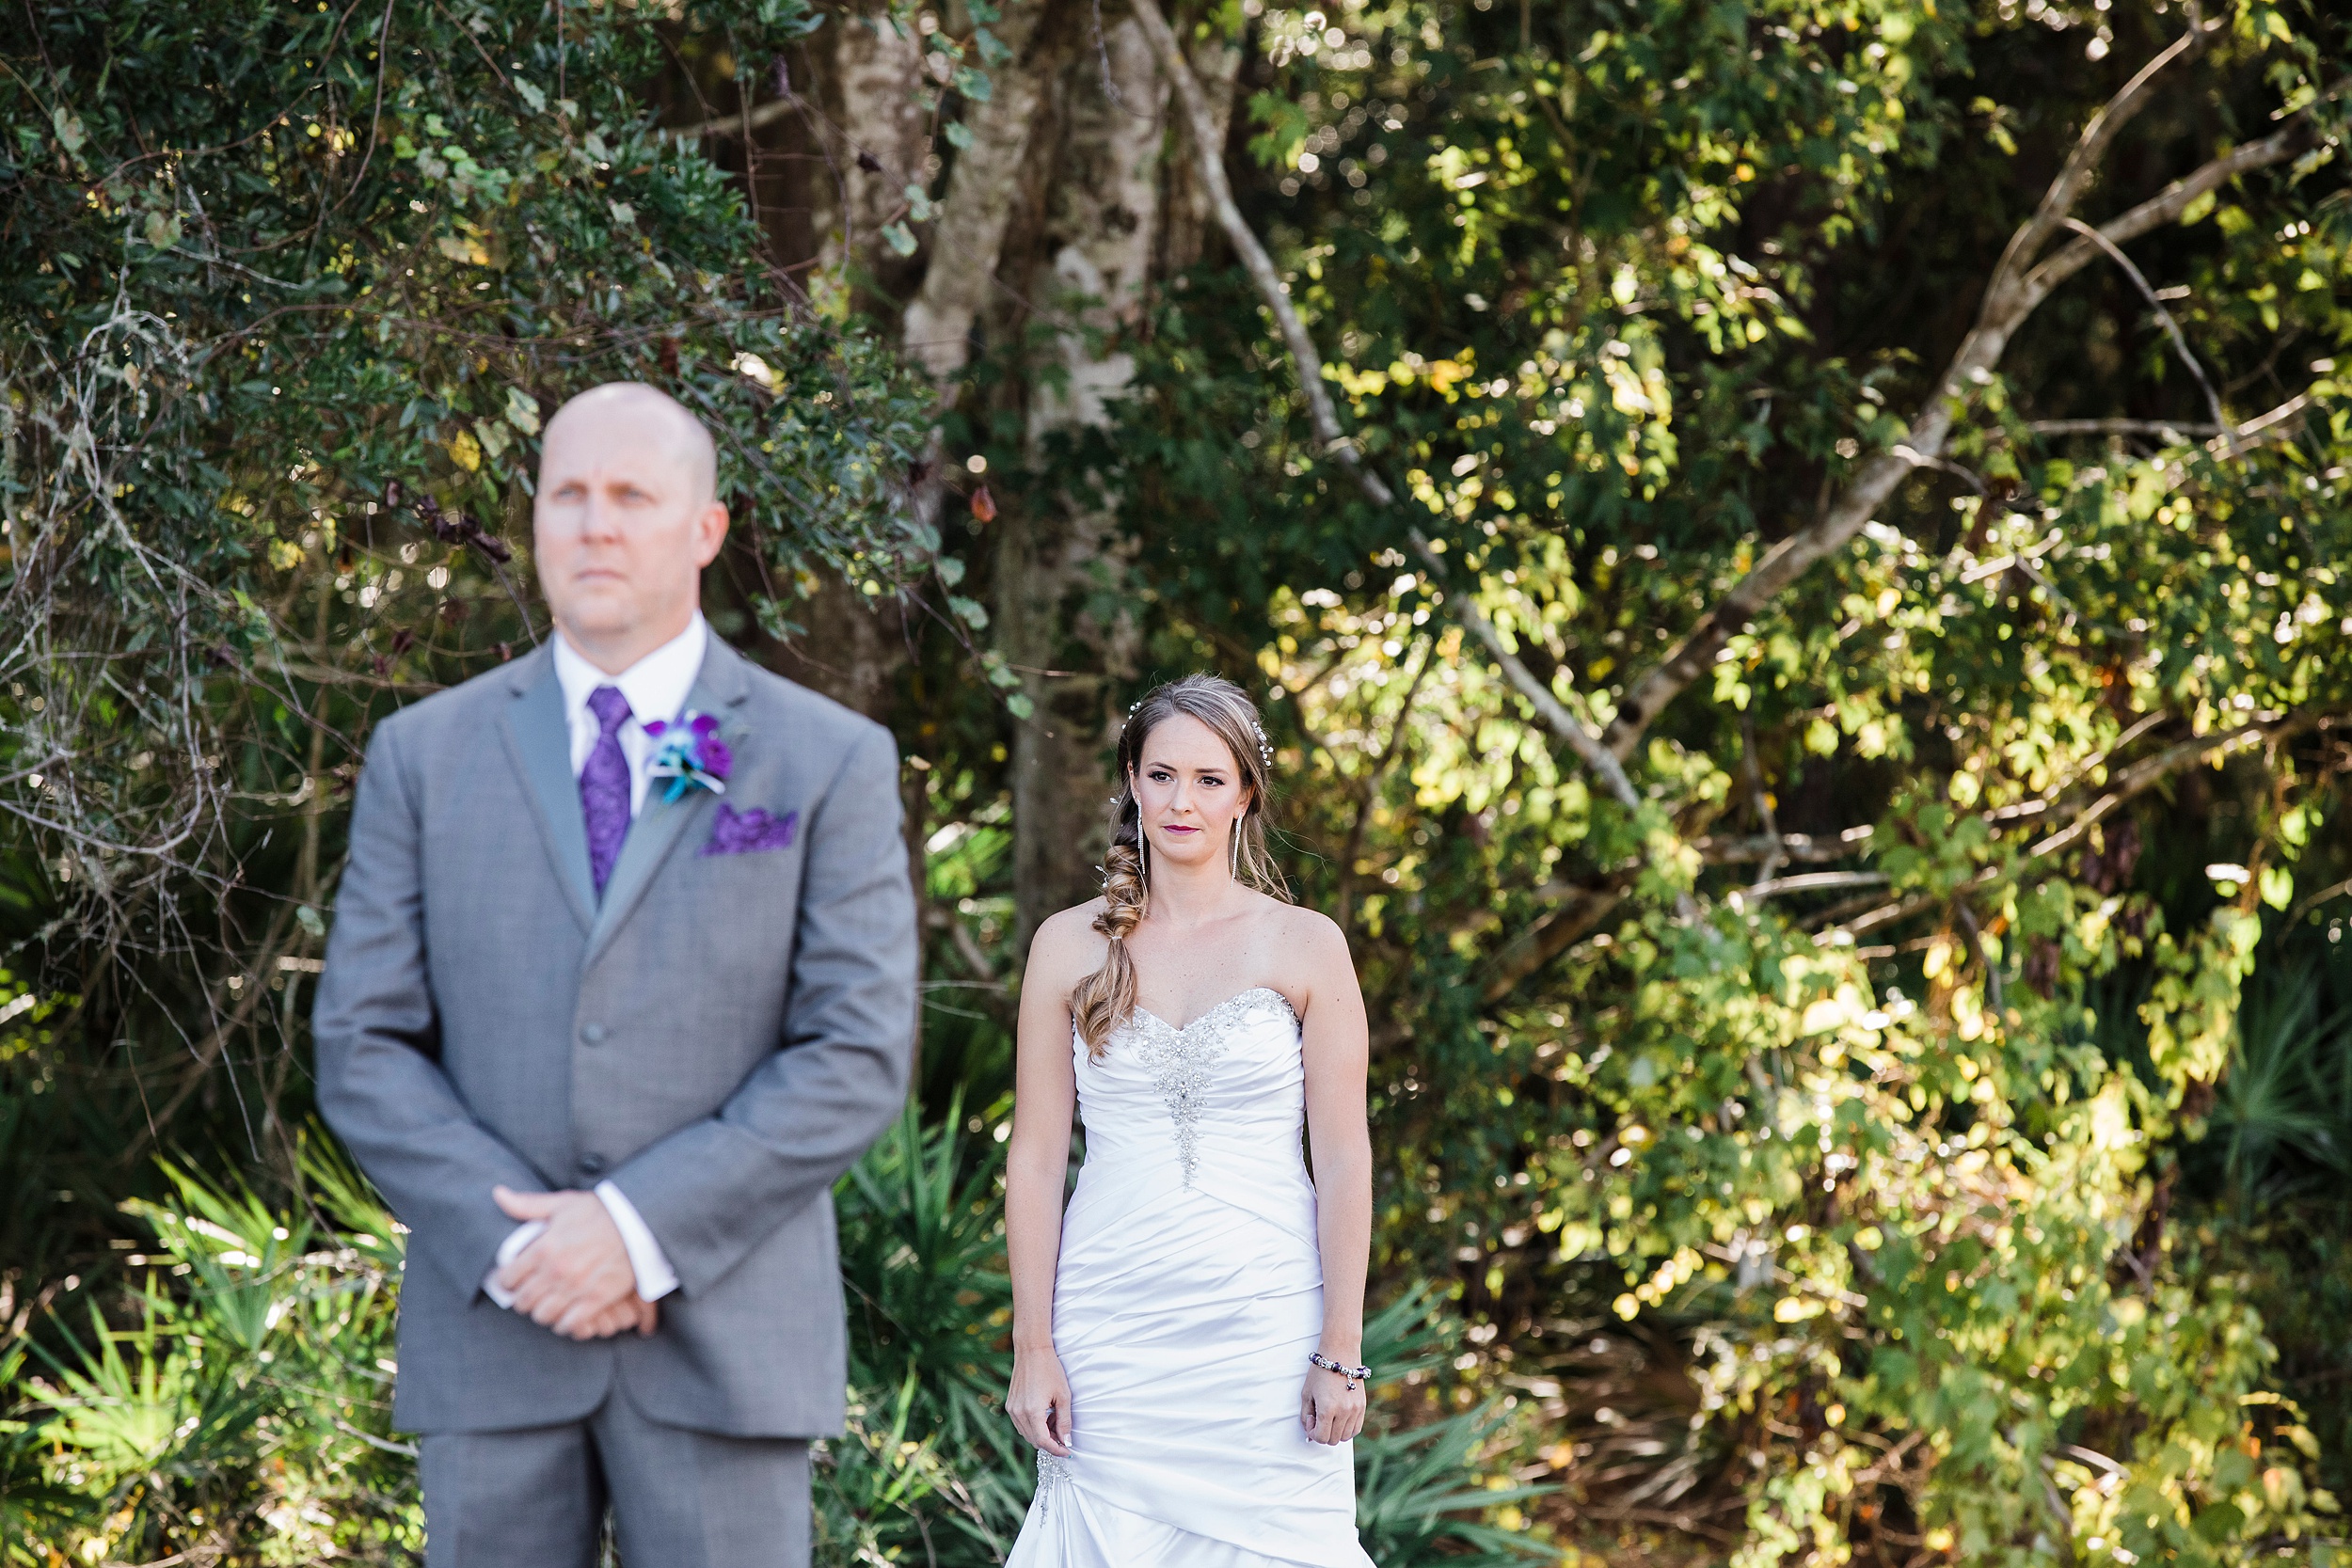 A bride nervously waits to call her husband to turn around for their first look